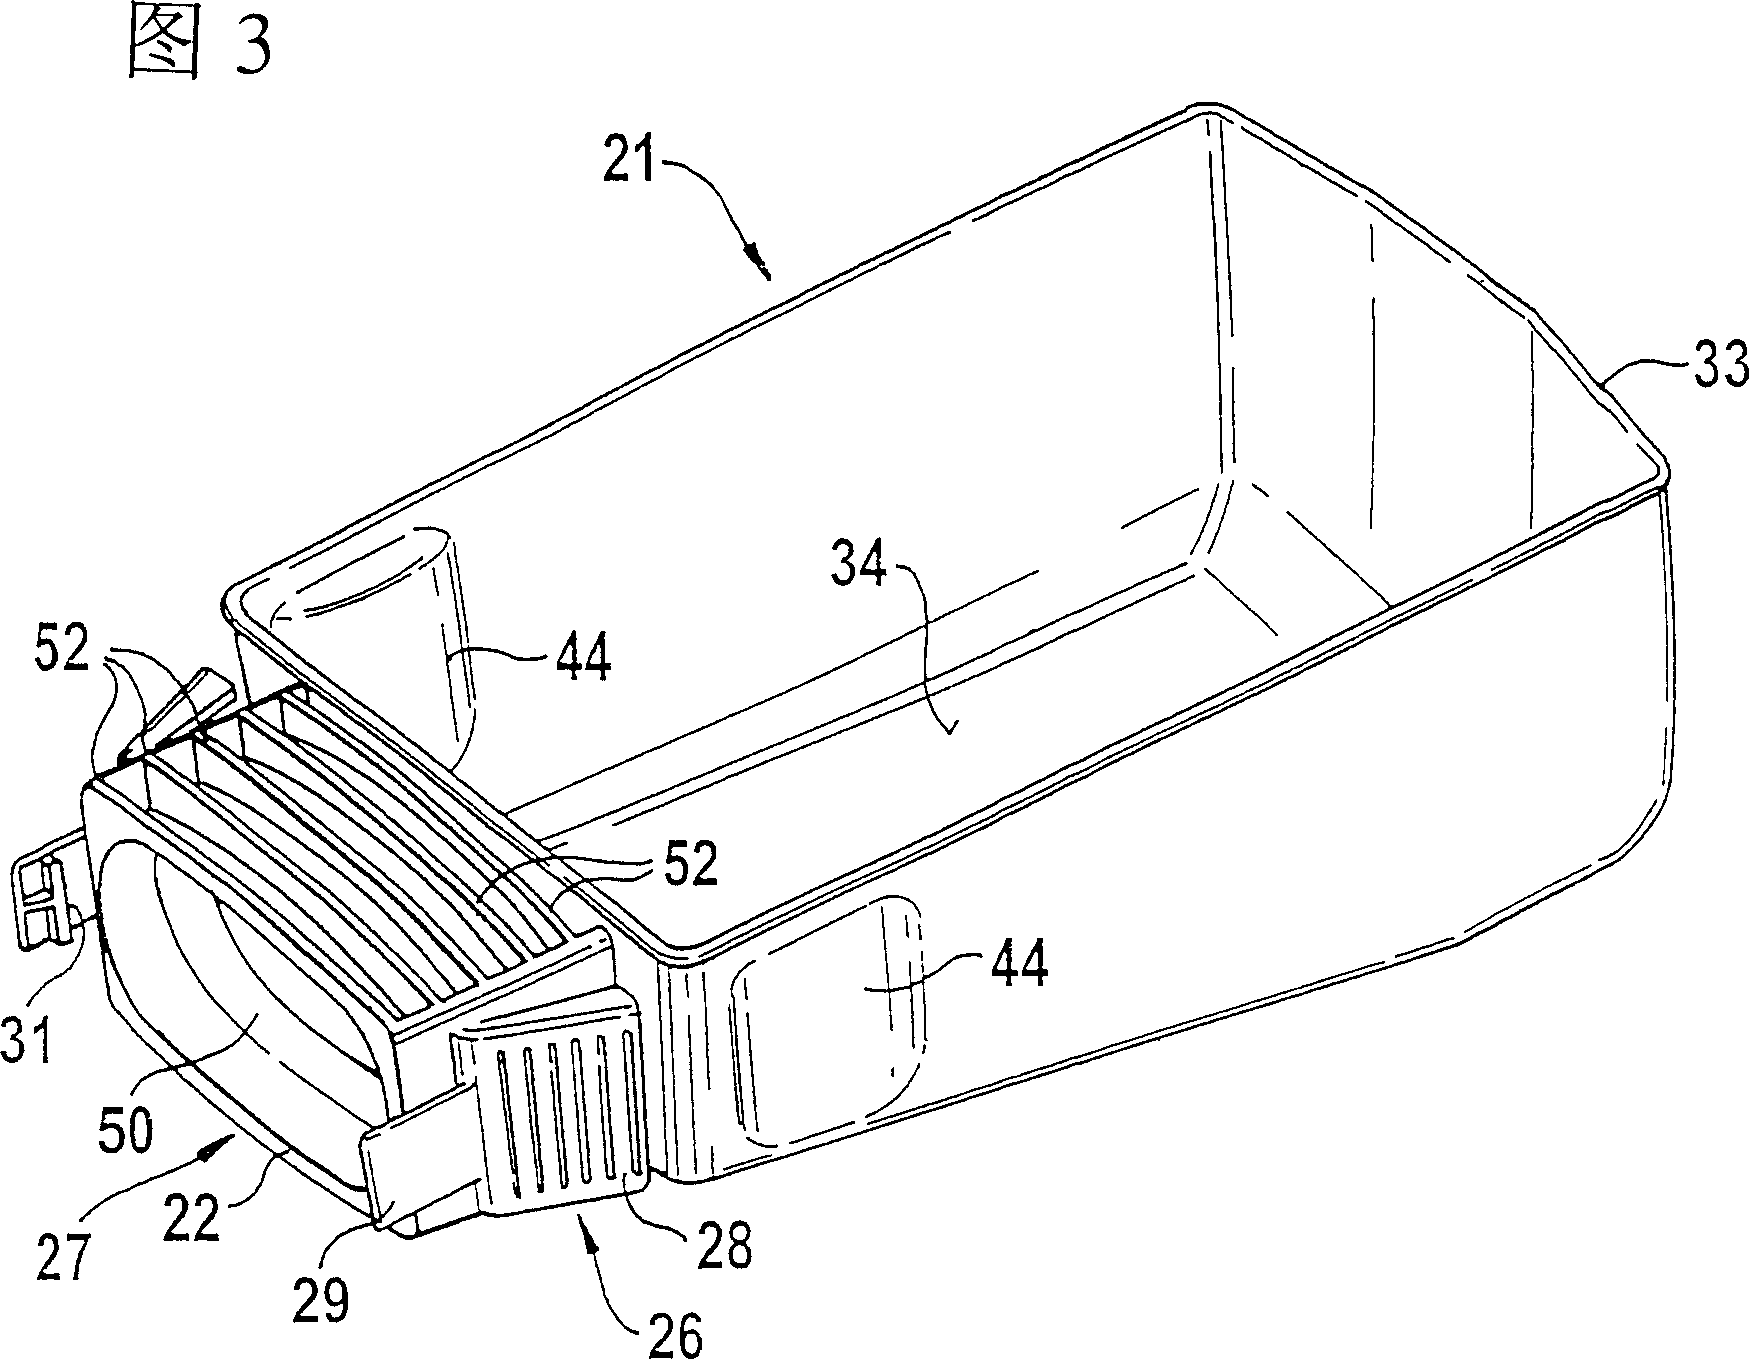 Hand-held tool with dust extractor